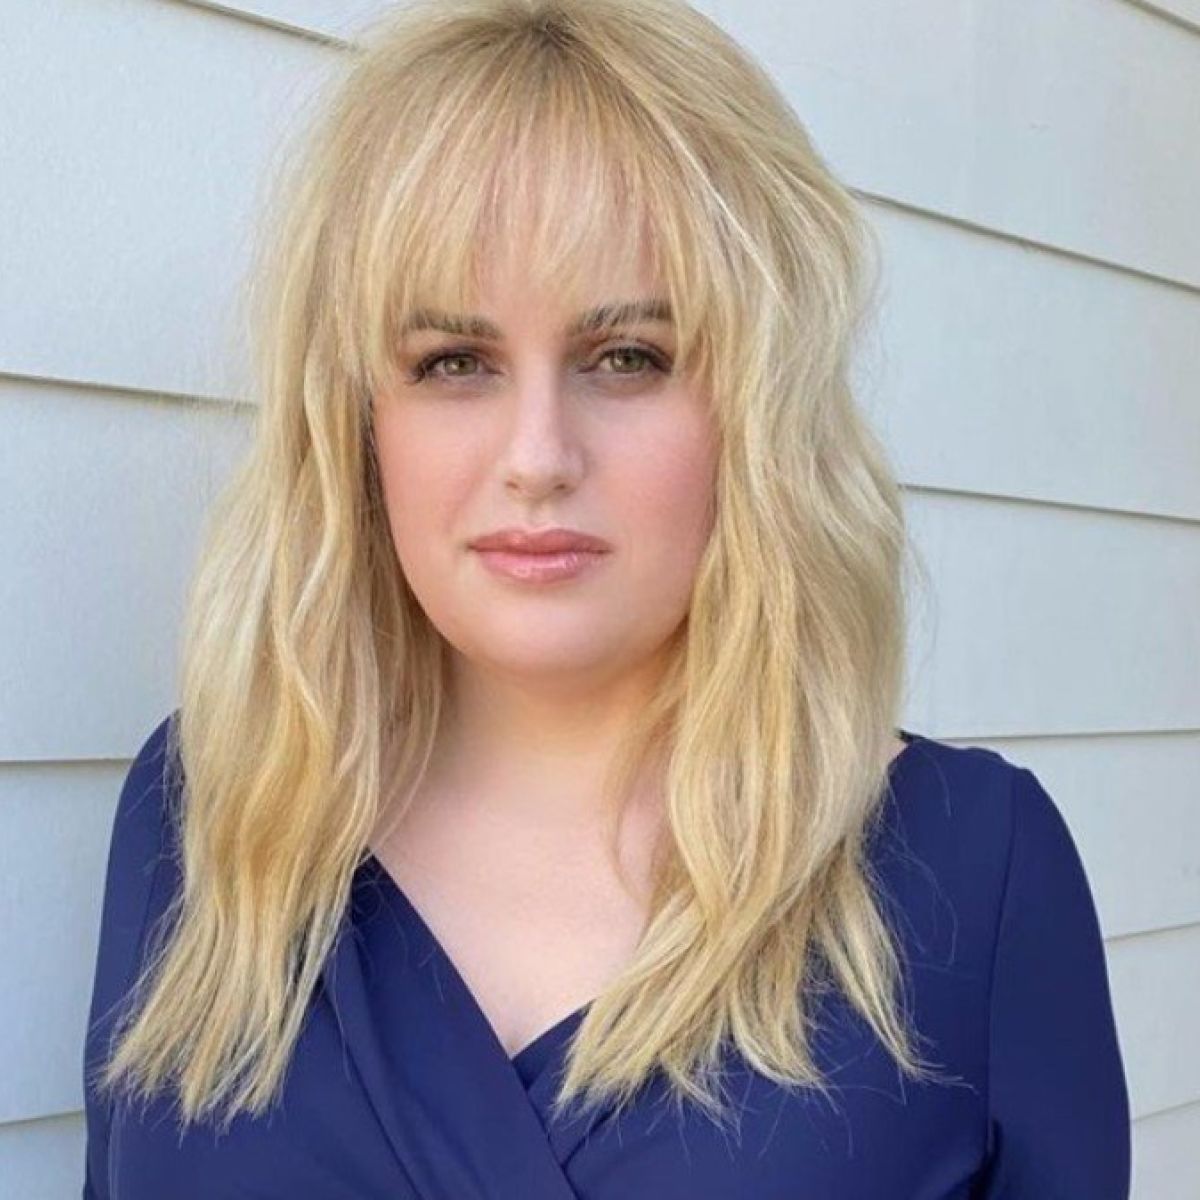 couscous Staple Ødelægge Rebel Wilson's 'unrecognisable' weight-loss photos are toxic and depressing